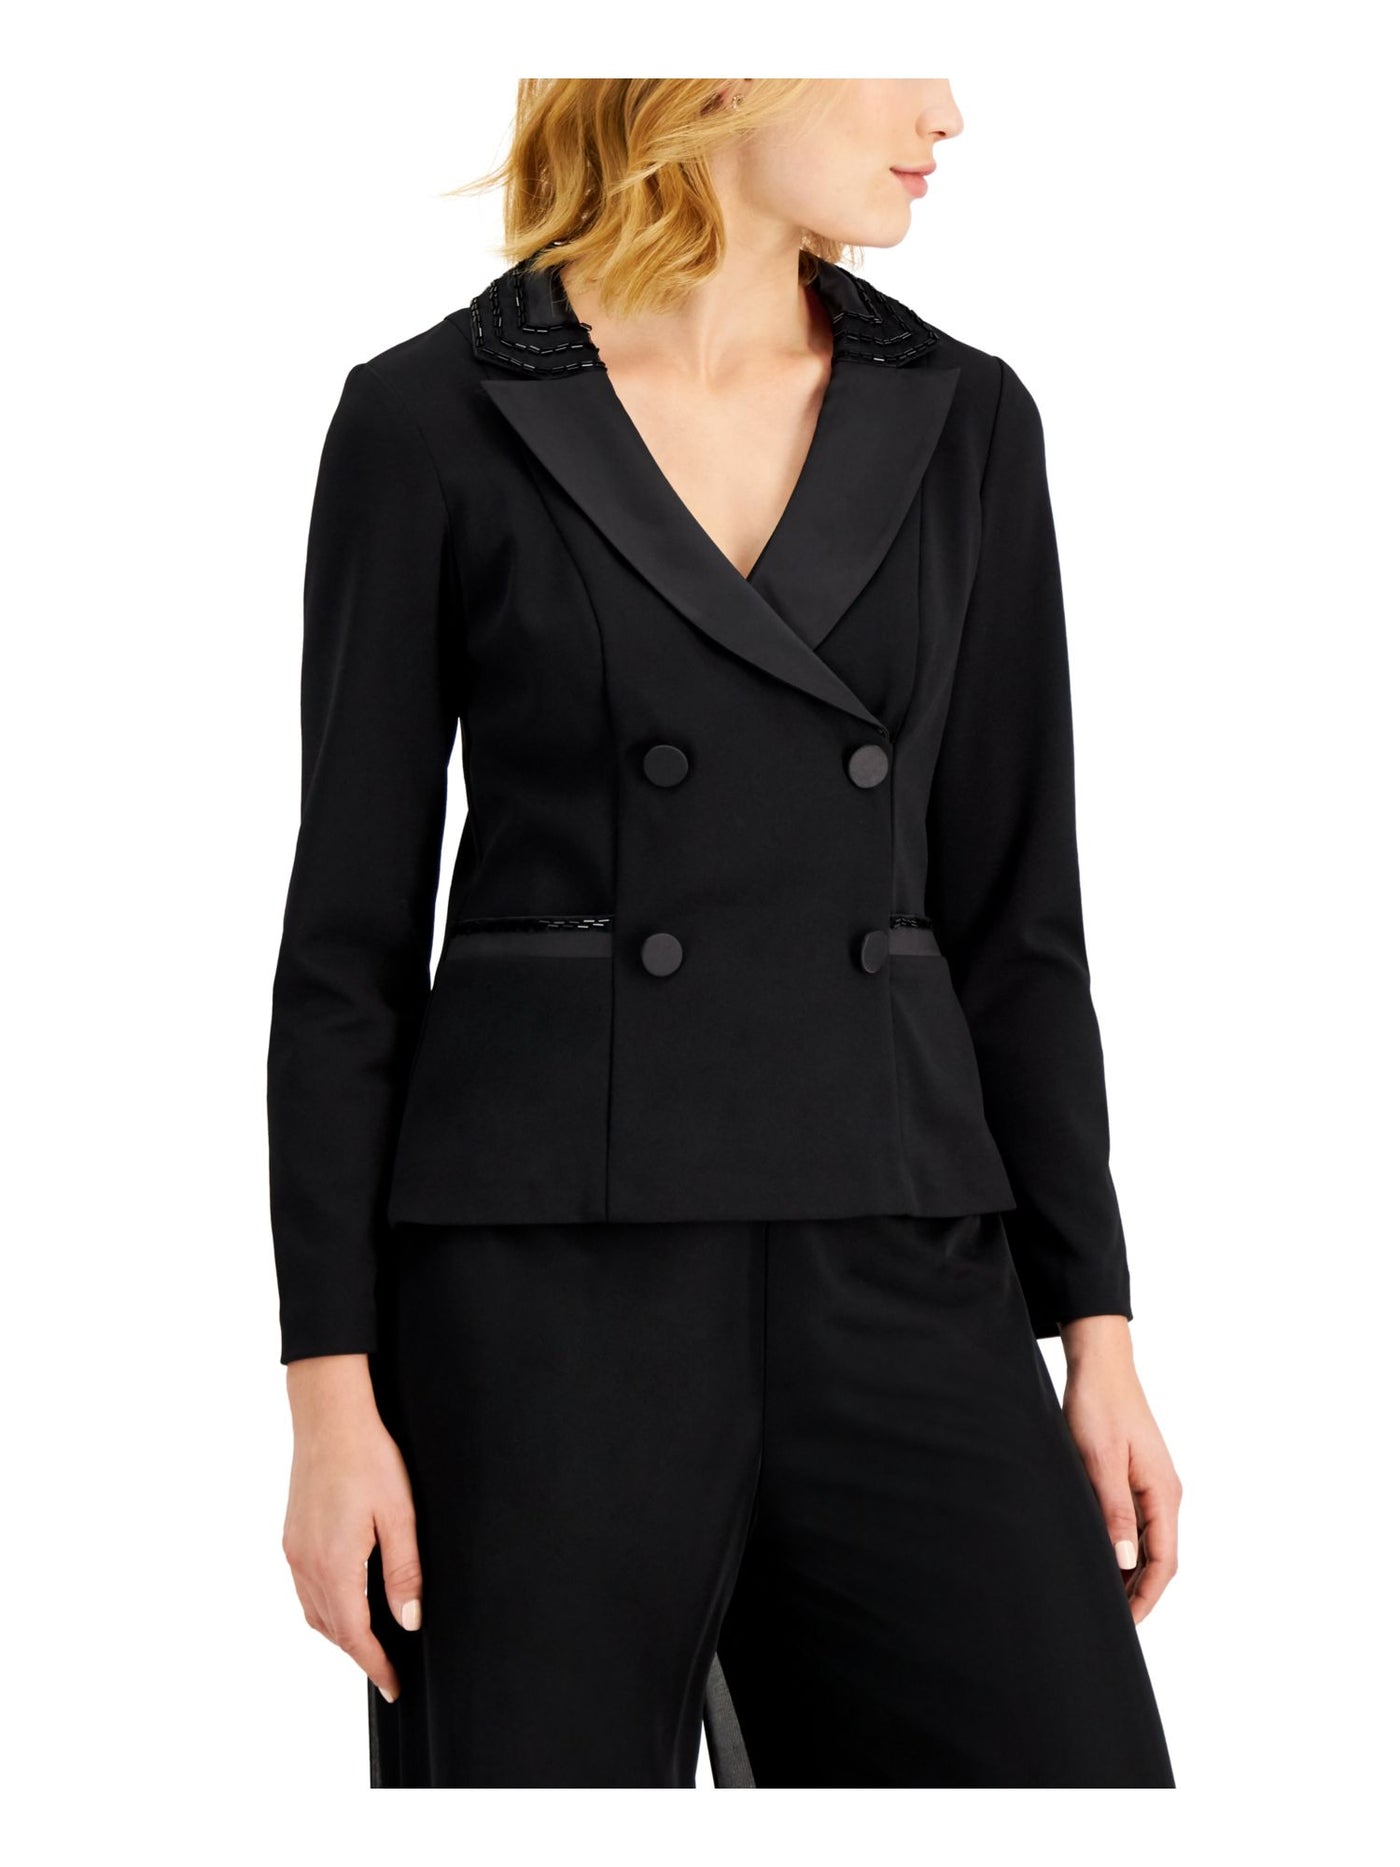 ADRIANNA PAPELL Womens Black Beaded Lined Double Breasted Tuxedo Wear To Work Jacket 8